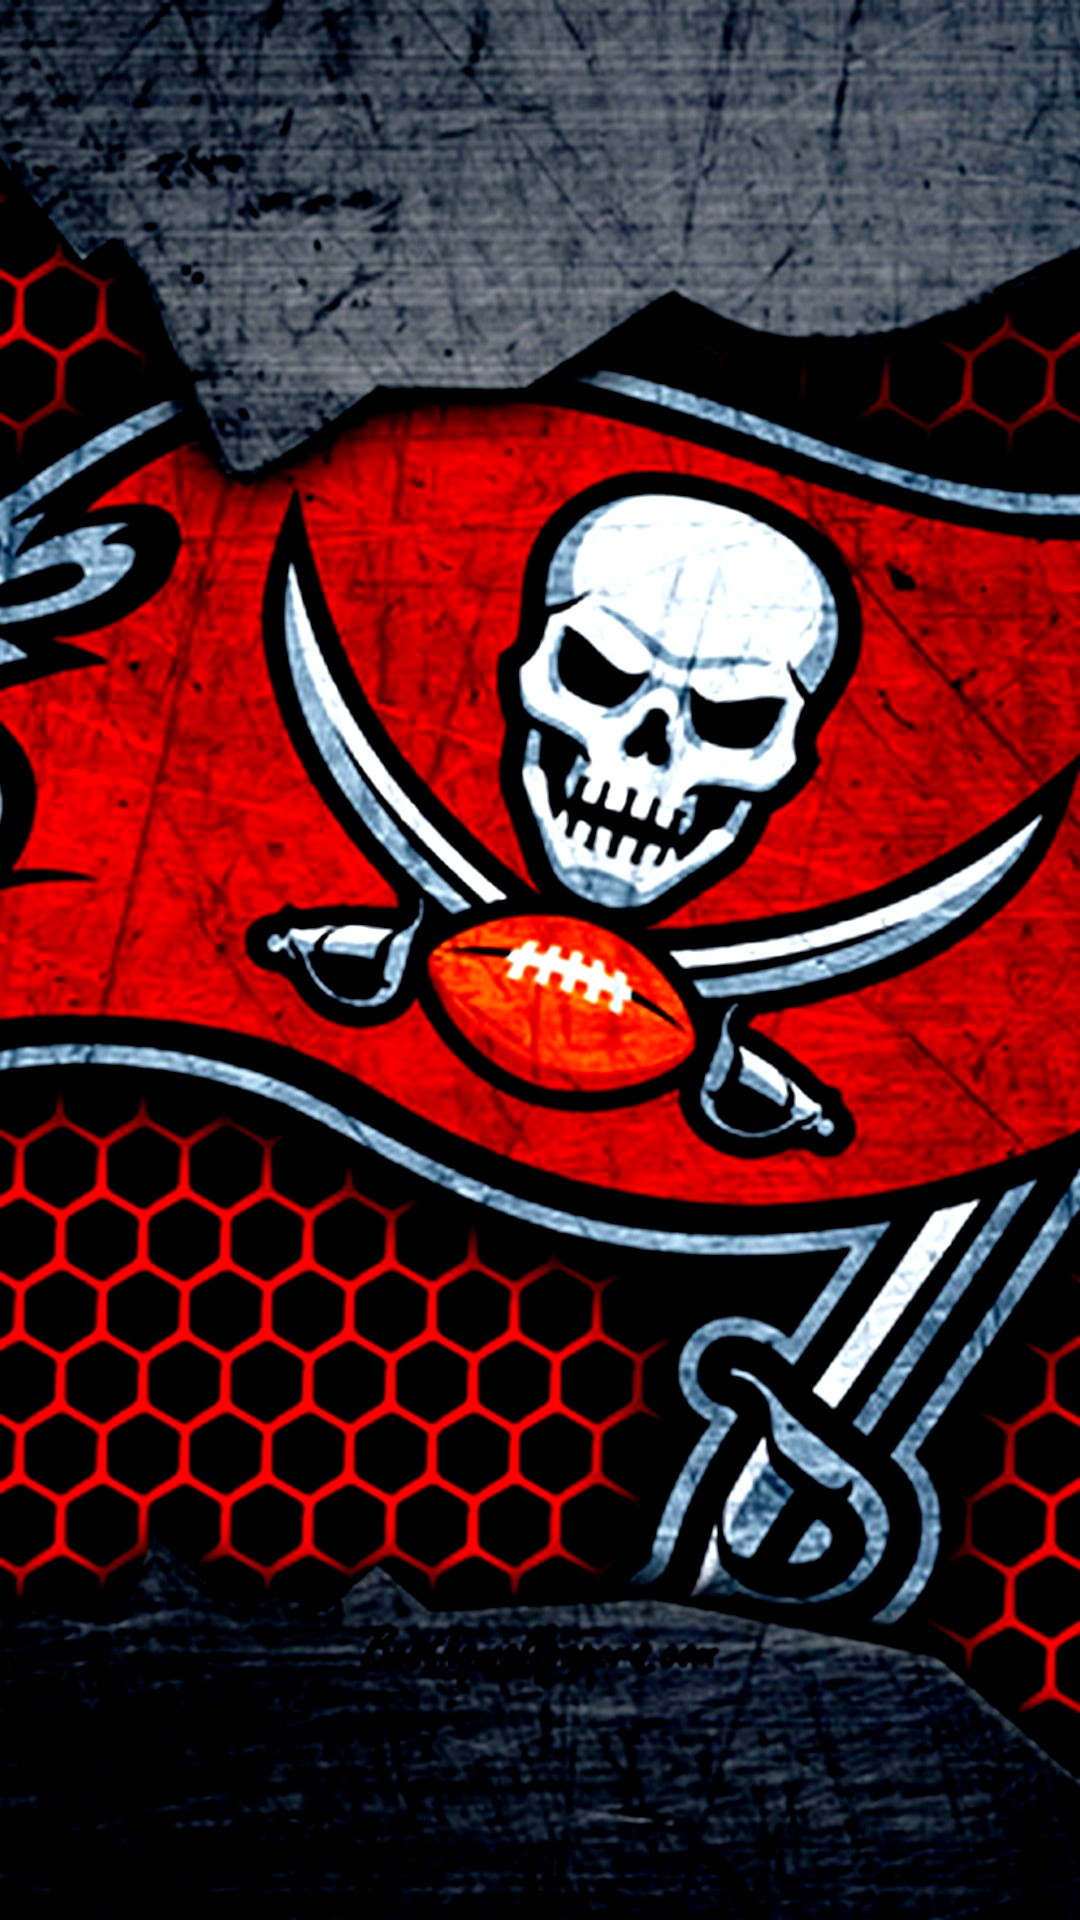 Tampa Bay Buccaneers Wallpaper Mobile with high-resolution 1080x1920 pixel. You can use and set as wallpaper for Notebook Screensavers, Mac Wallpapers, Mobile Home Screen, iPhone or Android Phones Lock Screen